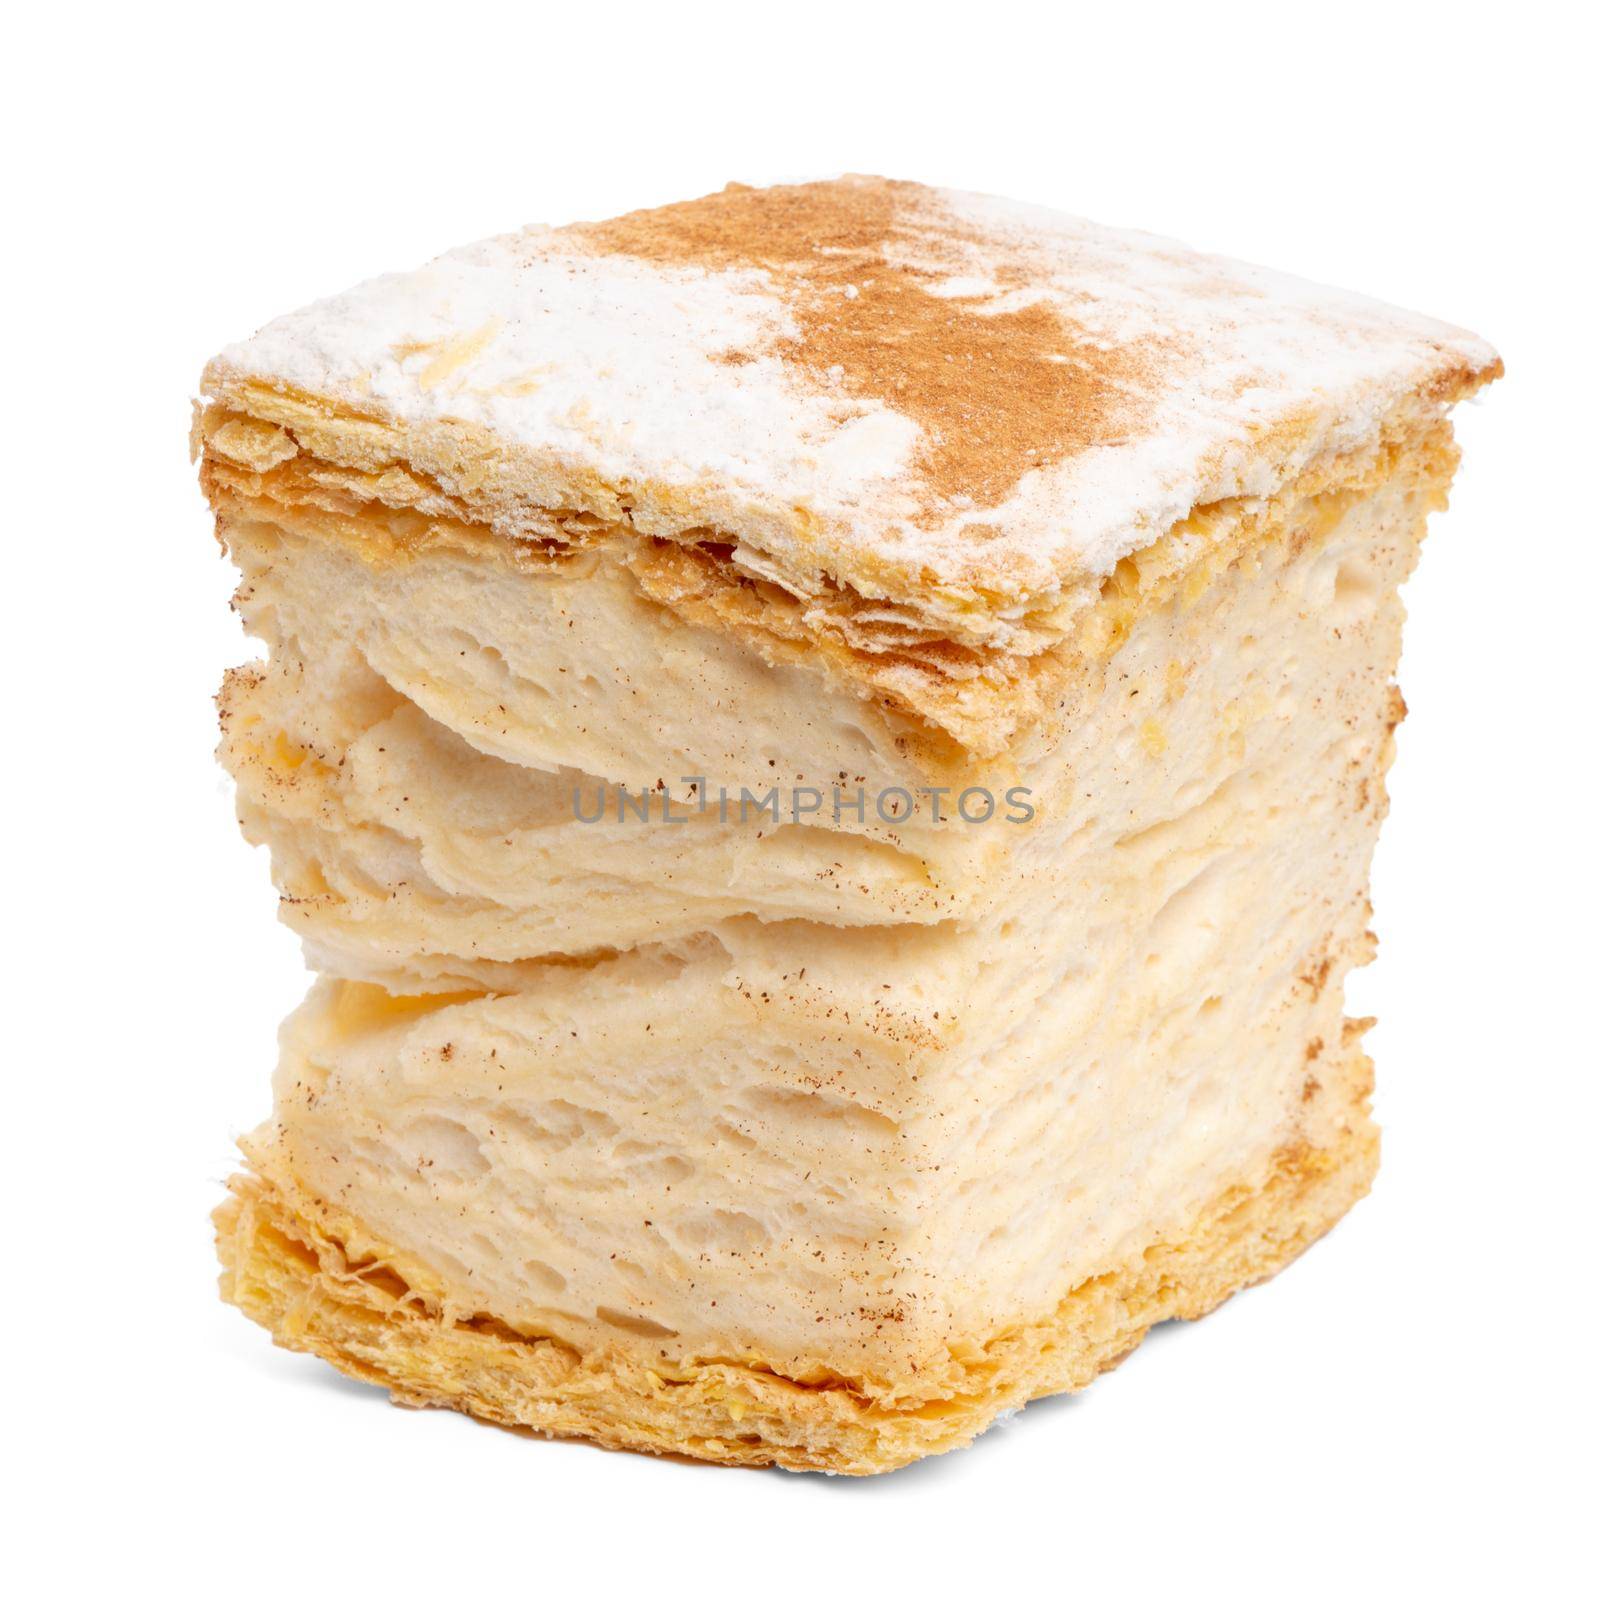 Russo cake pastry isolated on a white background.